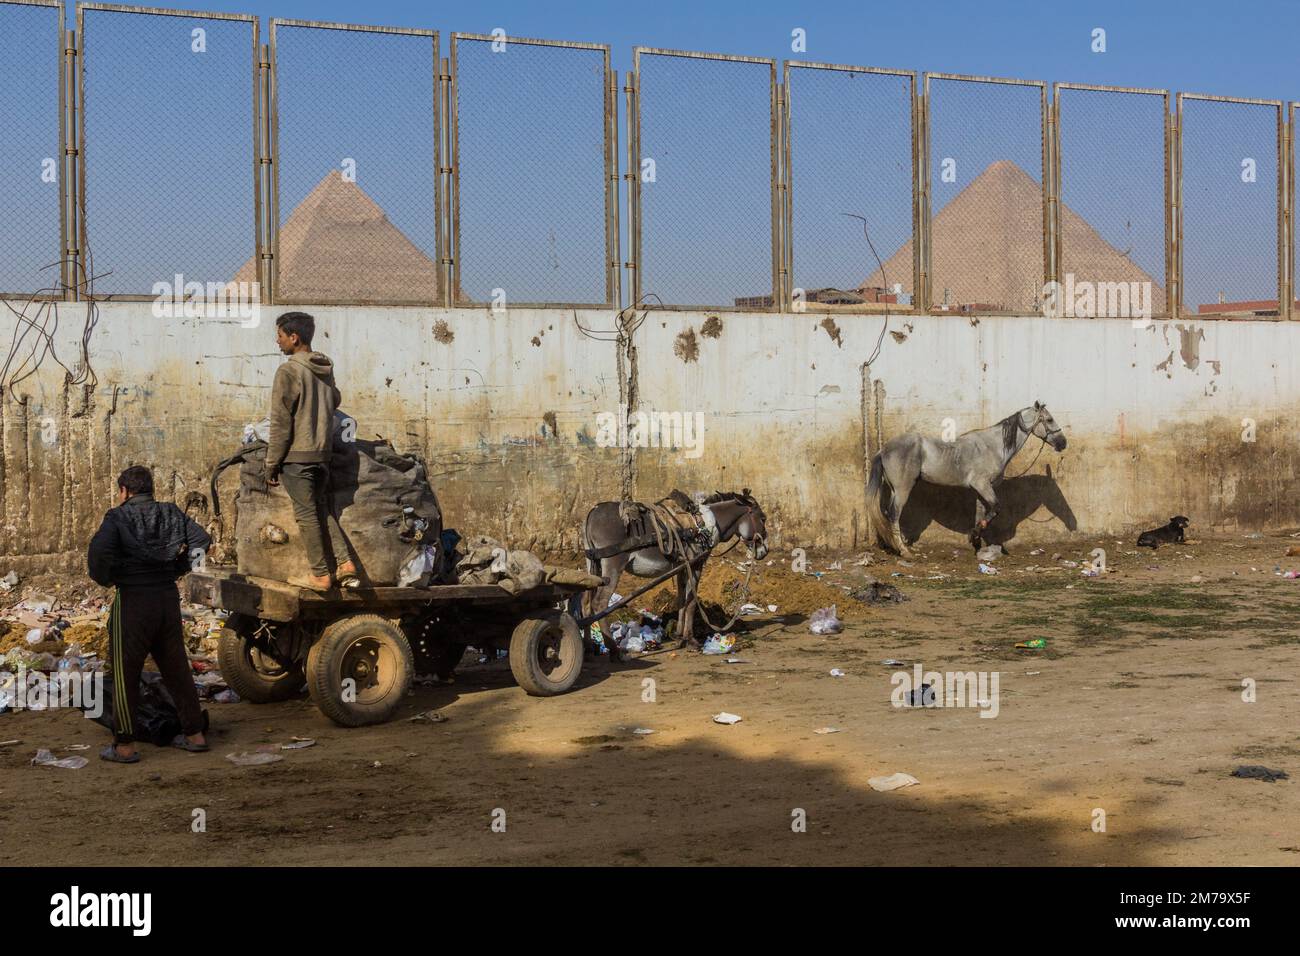 CAIRO, EGYPT - JANUARY 31, 2019: Donkey carriage collecting rubbish in Giza neighborhood of Cairo, Egypt Stock Photo